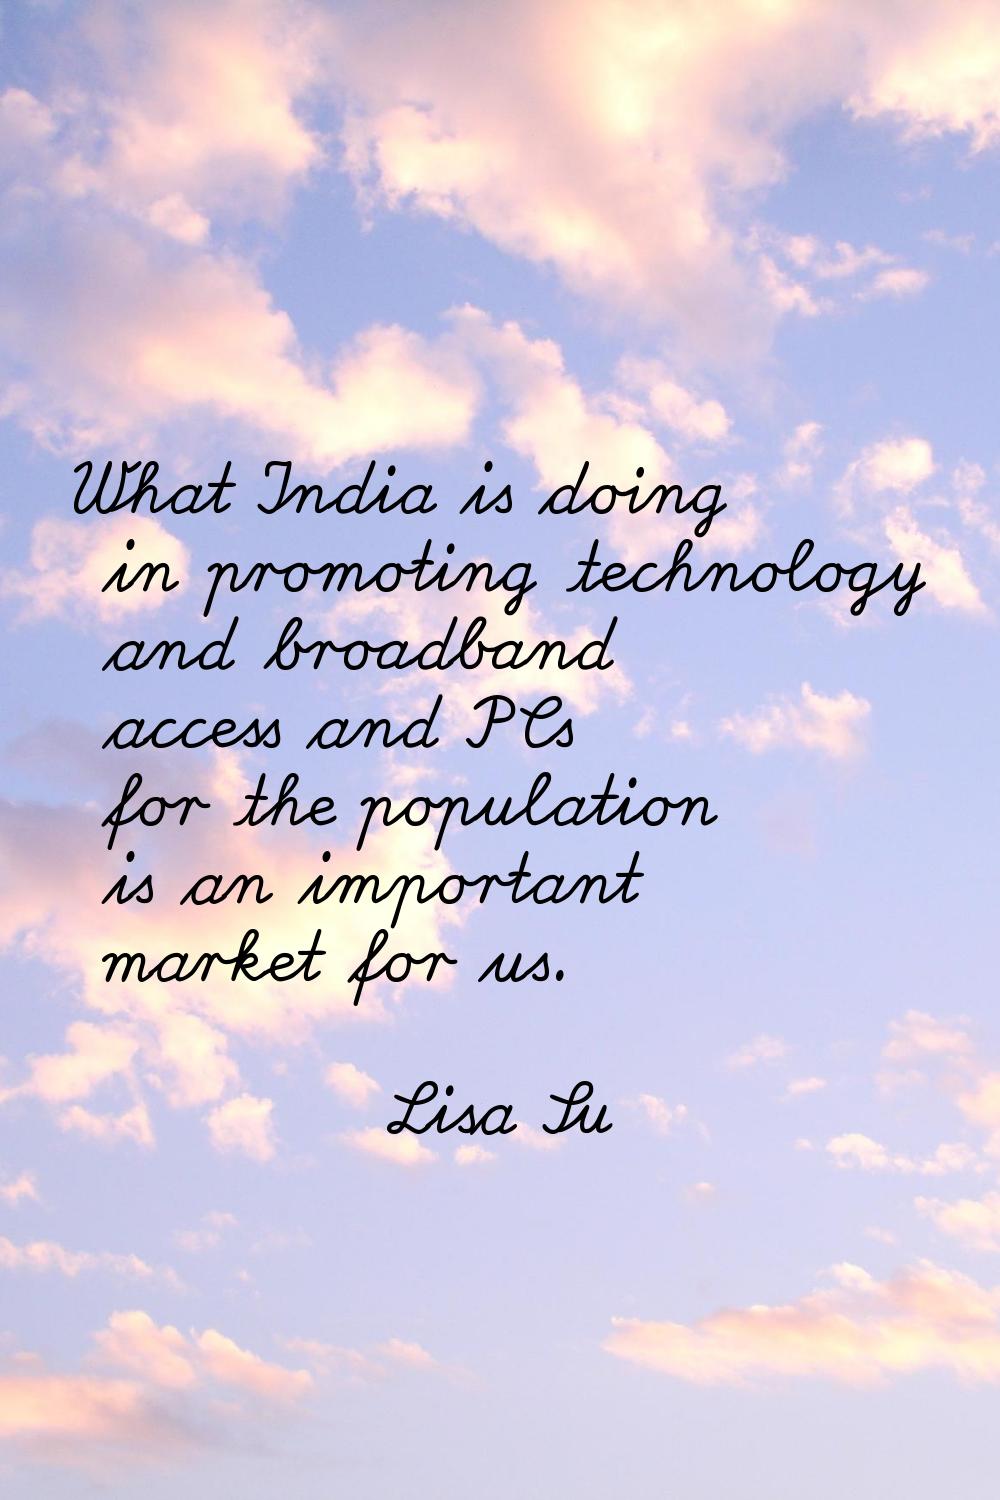 What India is doing in promoting technology and broadband access and PCs for the population is an i